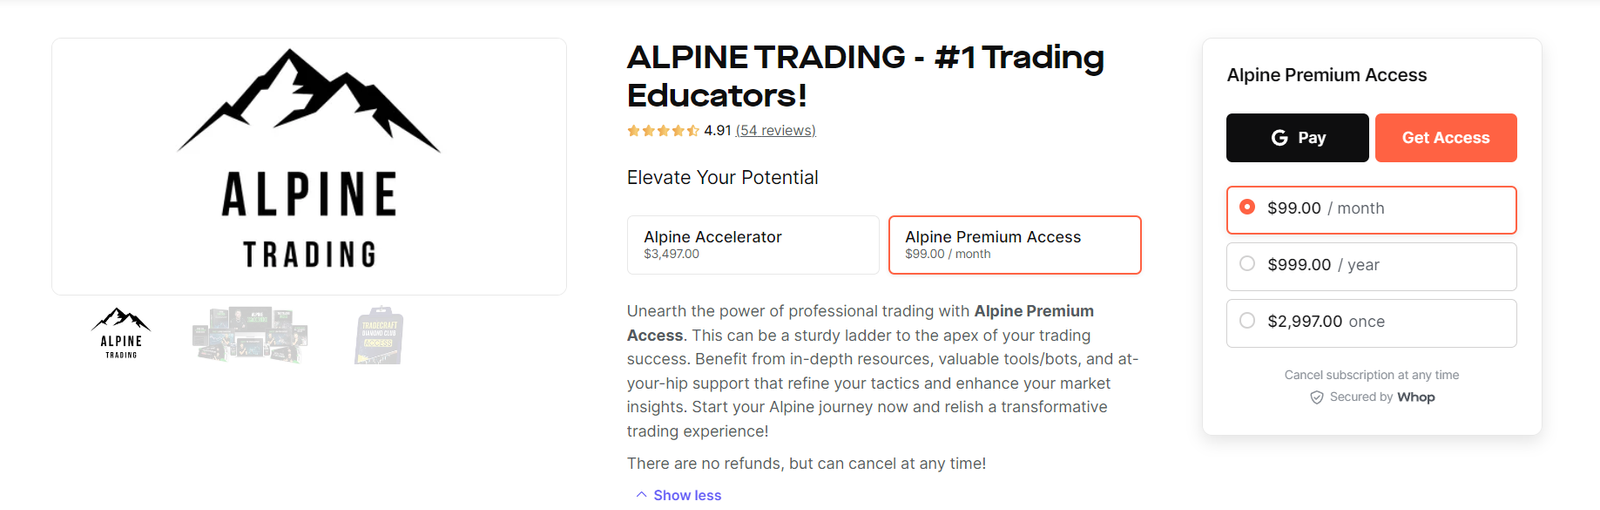 Alpine Trading Discord Trading Group Review